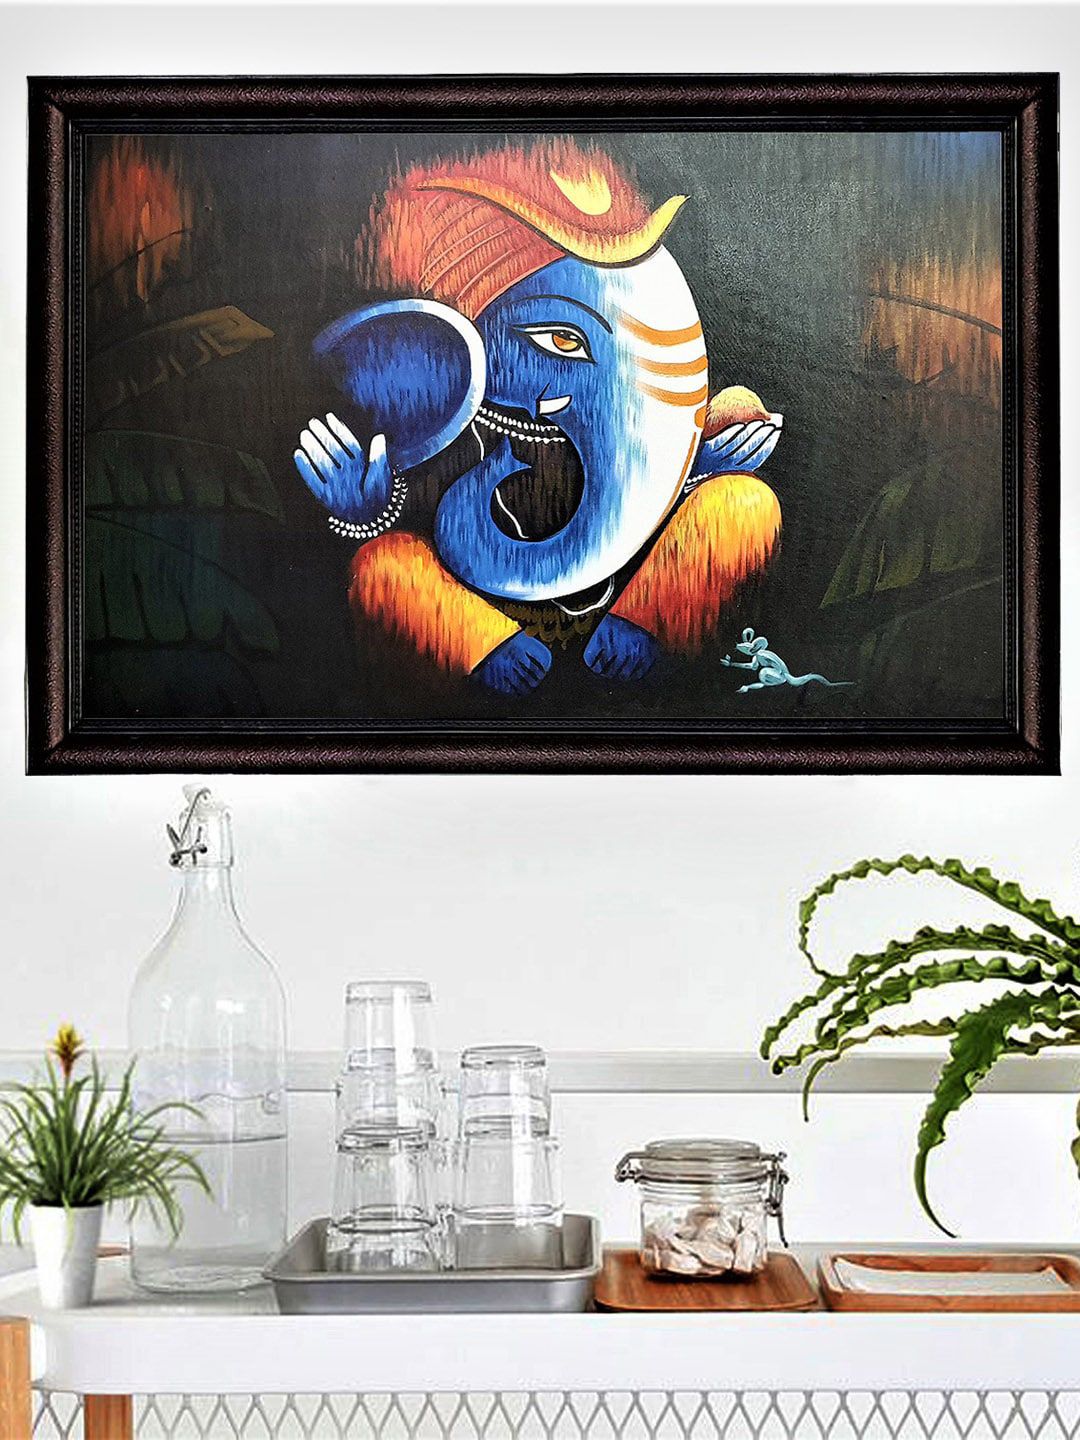 Gallery99 Black Abstract Painting Wall Art Price in India